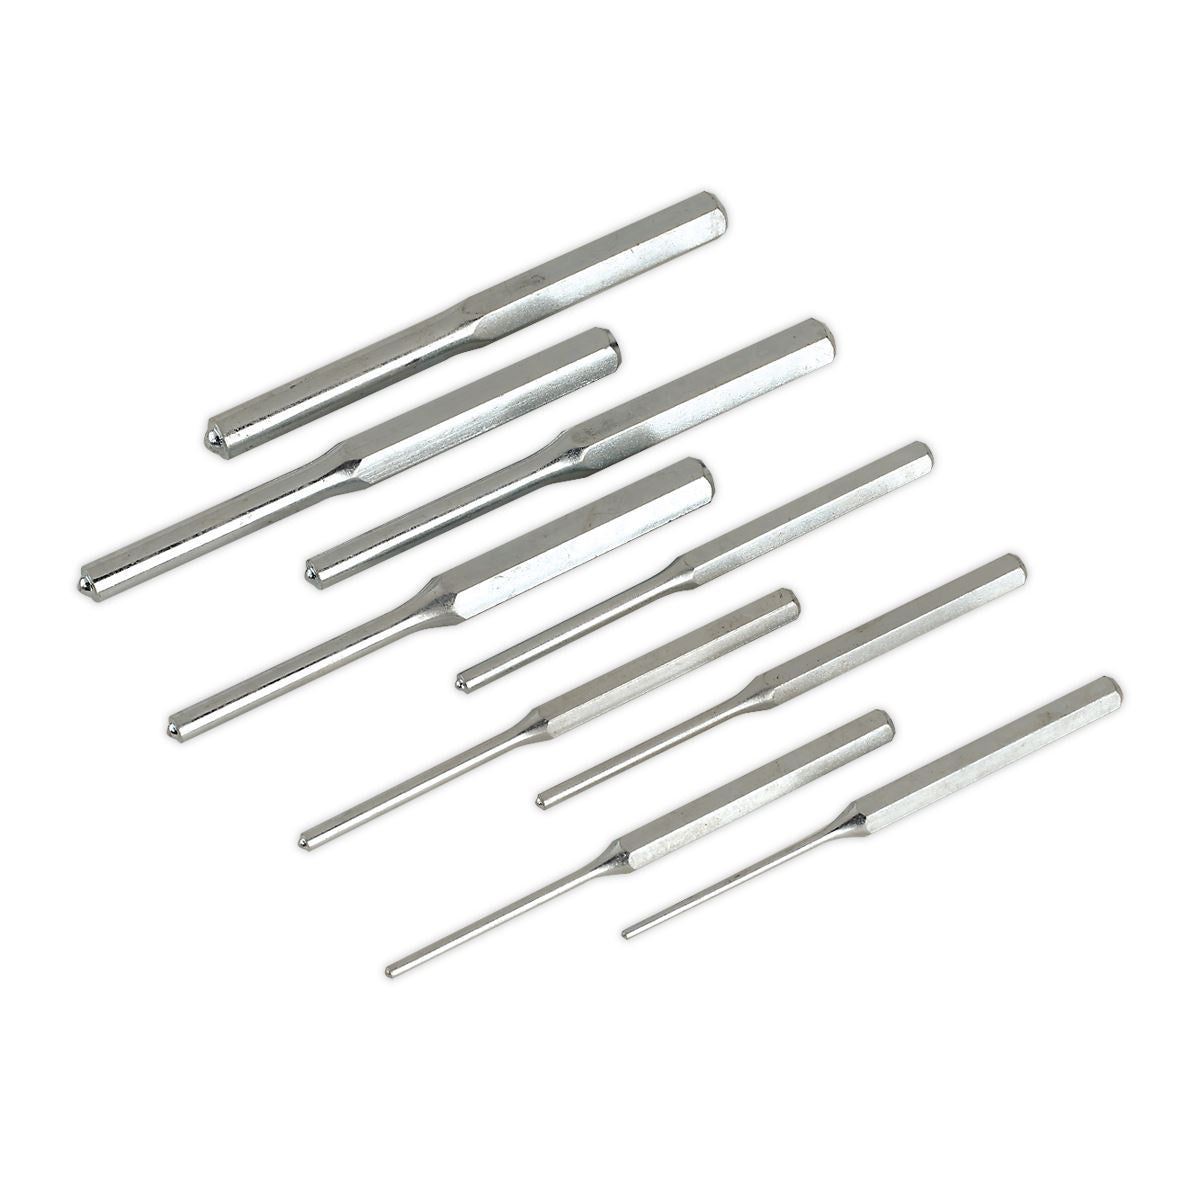 Sealey Premier Roll Pin Punch Set 9pc 1/8-1/2" - Imperial